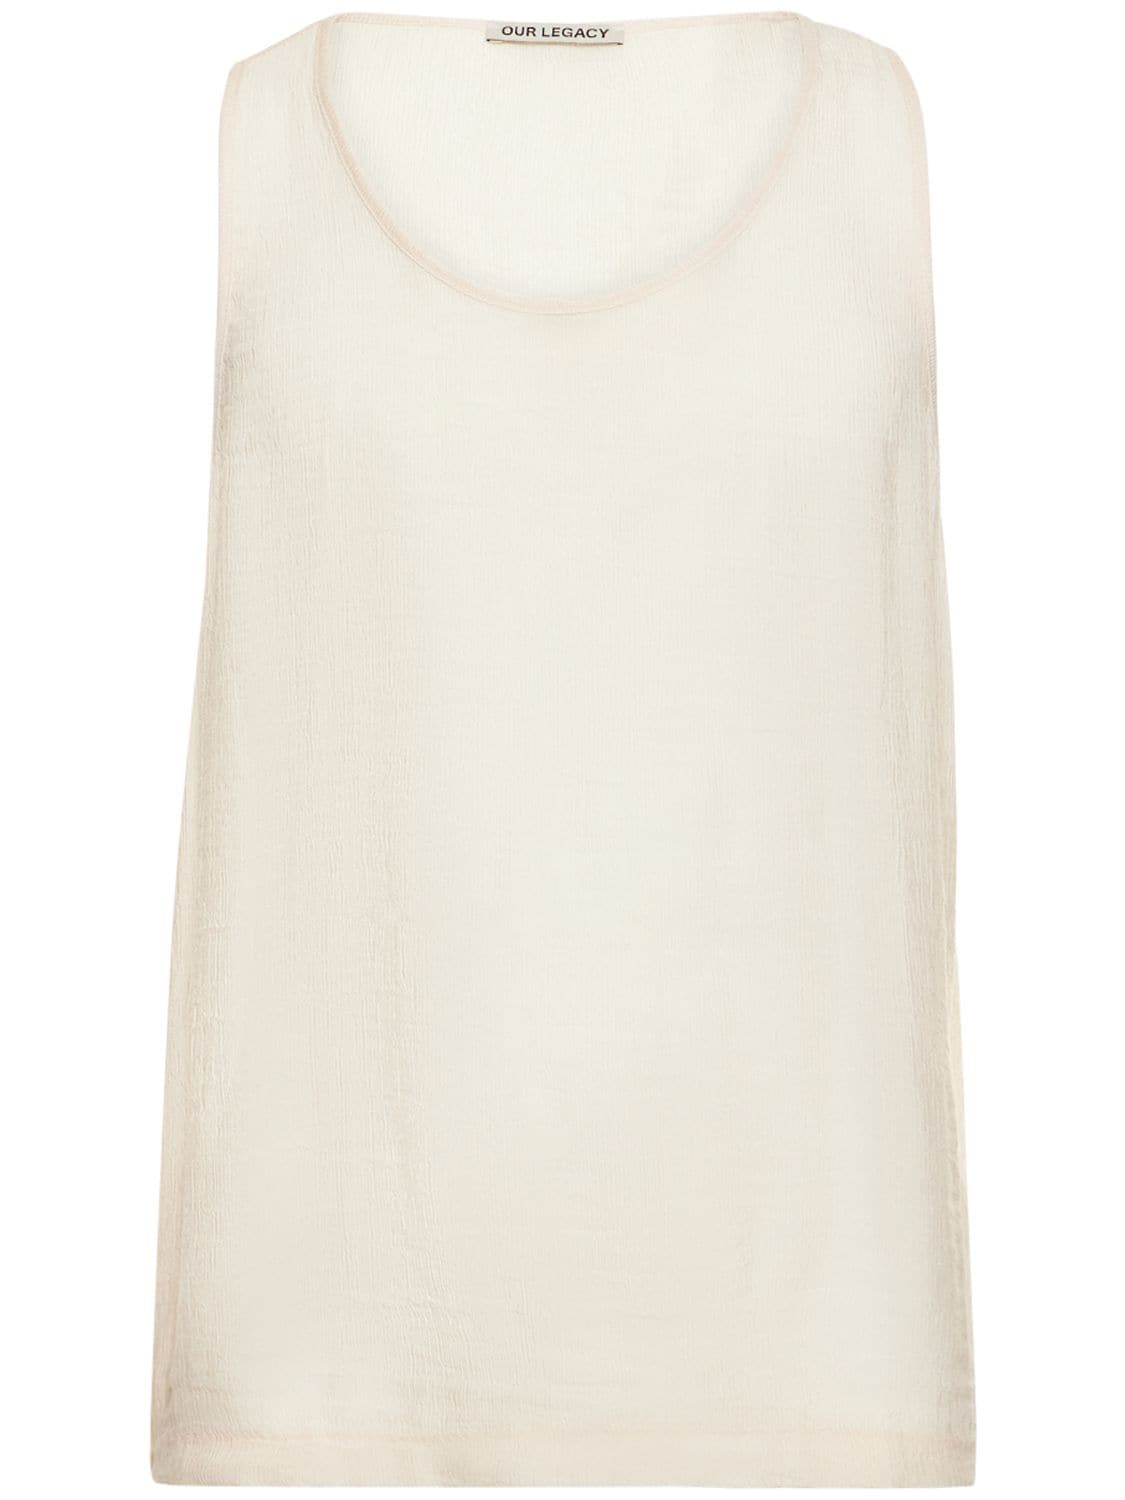 OUR LEGACY SINGLET RUFFLED VISCOSE TANK TOP